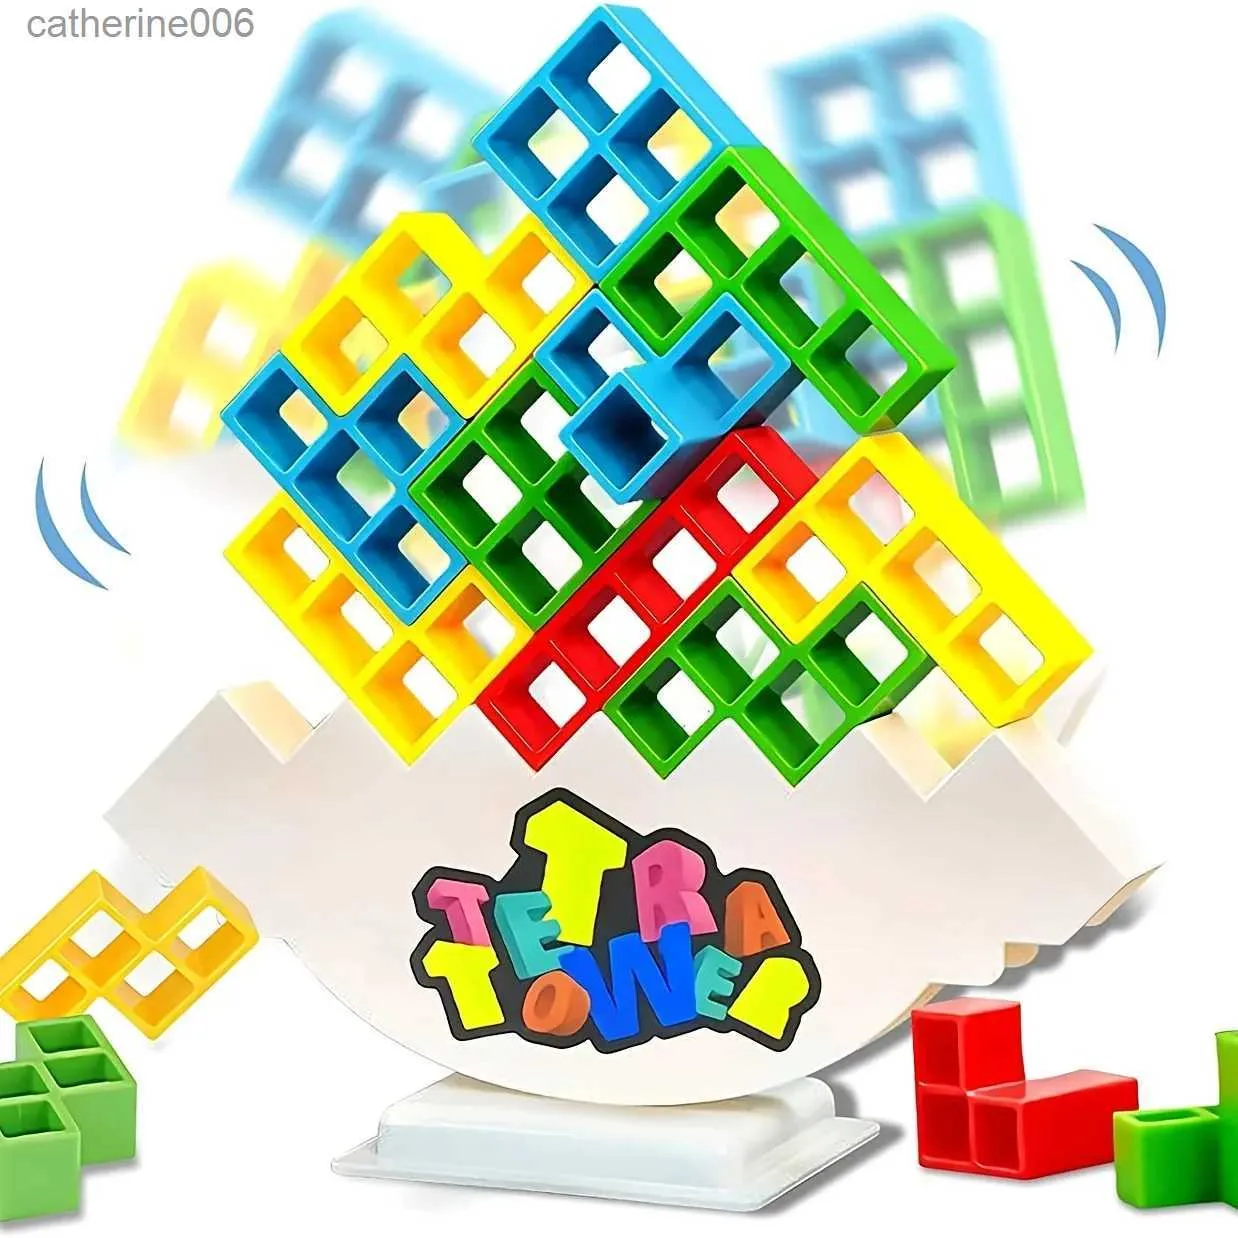 3D Tetra Tower Balance Building Blocks Board Game Perfect Family Game For  Kids And Adults Stacking And Team Building Games Arco Other World Toys  ToyL231024 From Catherine006, $0.54